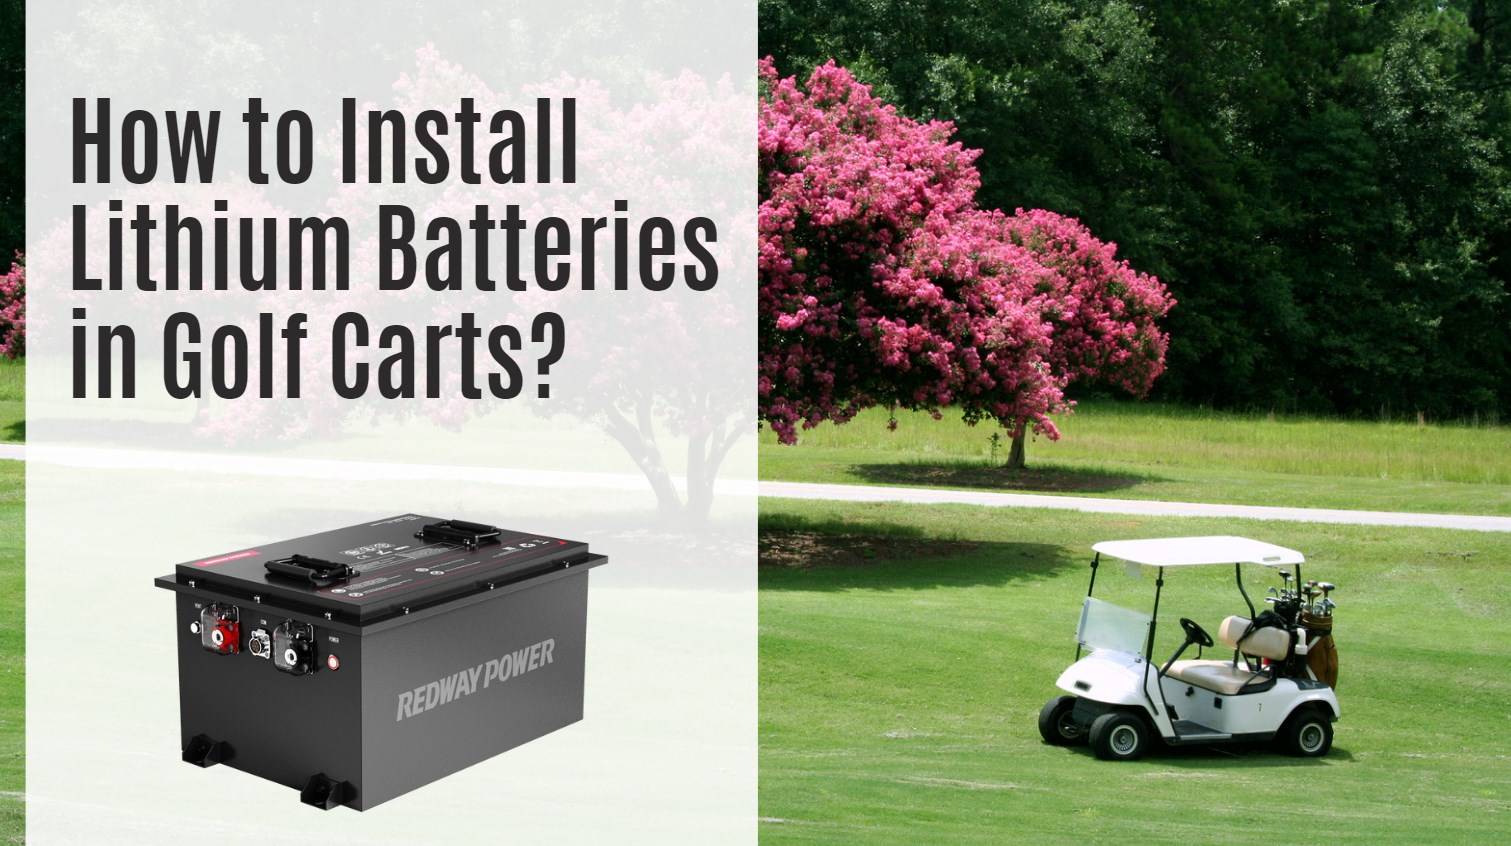 How to Install Lithium Batteries in Golf Carts? 48v 100ah 51.2v 100ah